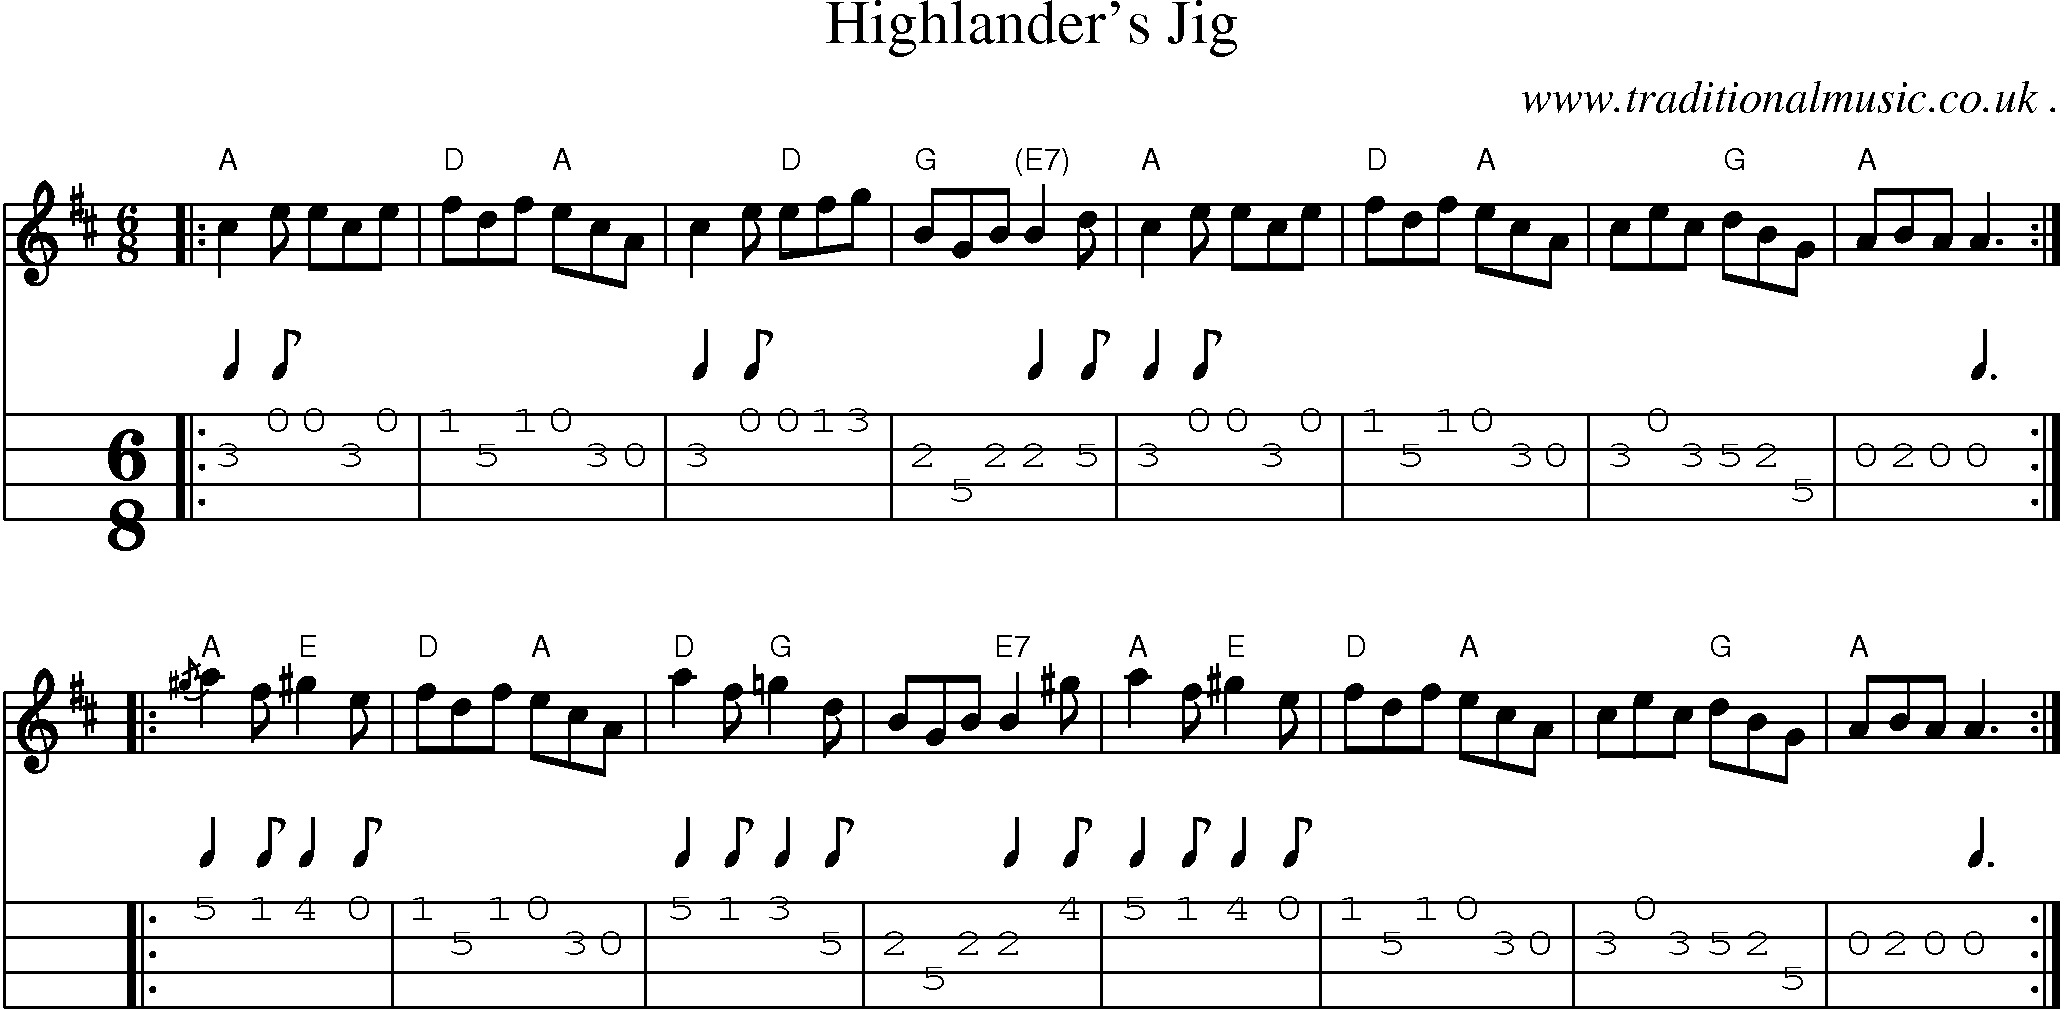 Sheet-music  score, Chords and Mandolin Tabs for Highlanders Jig